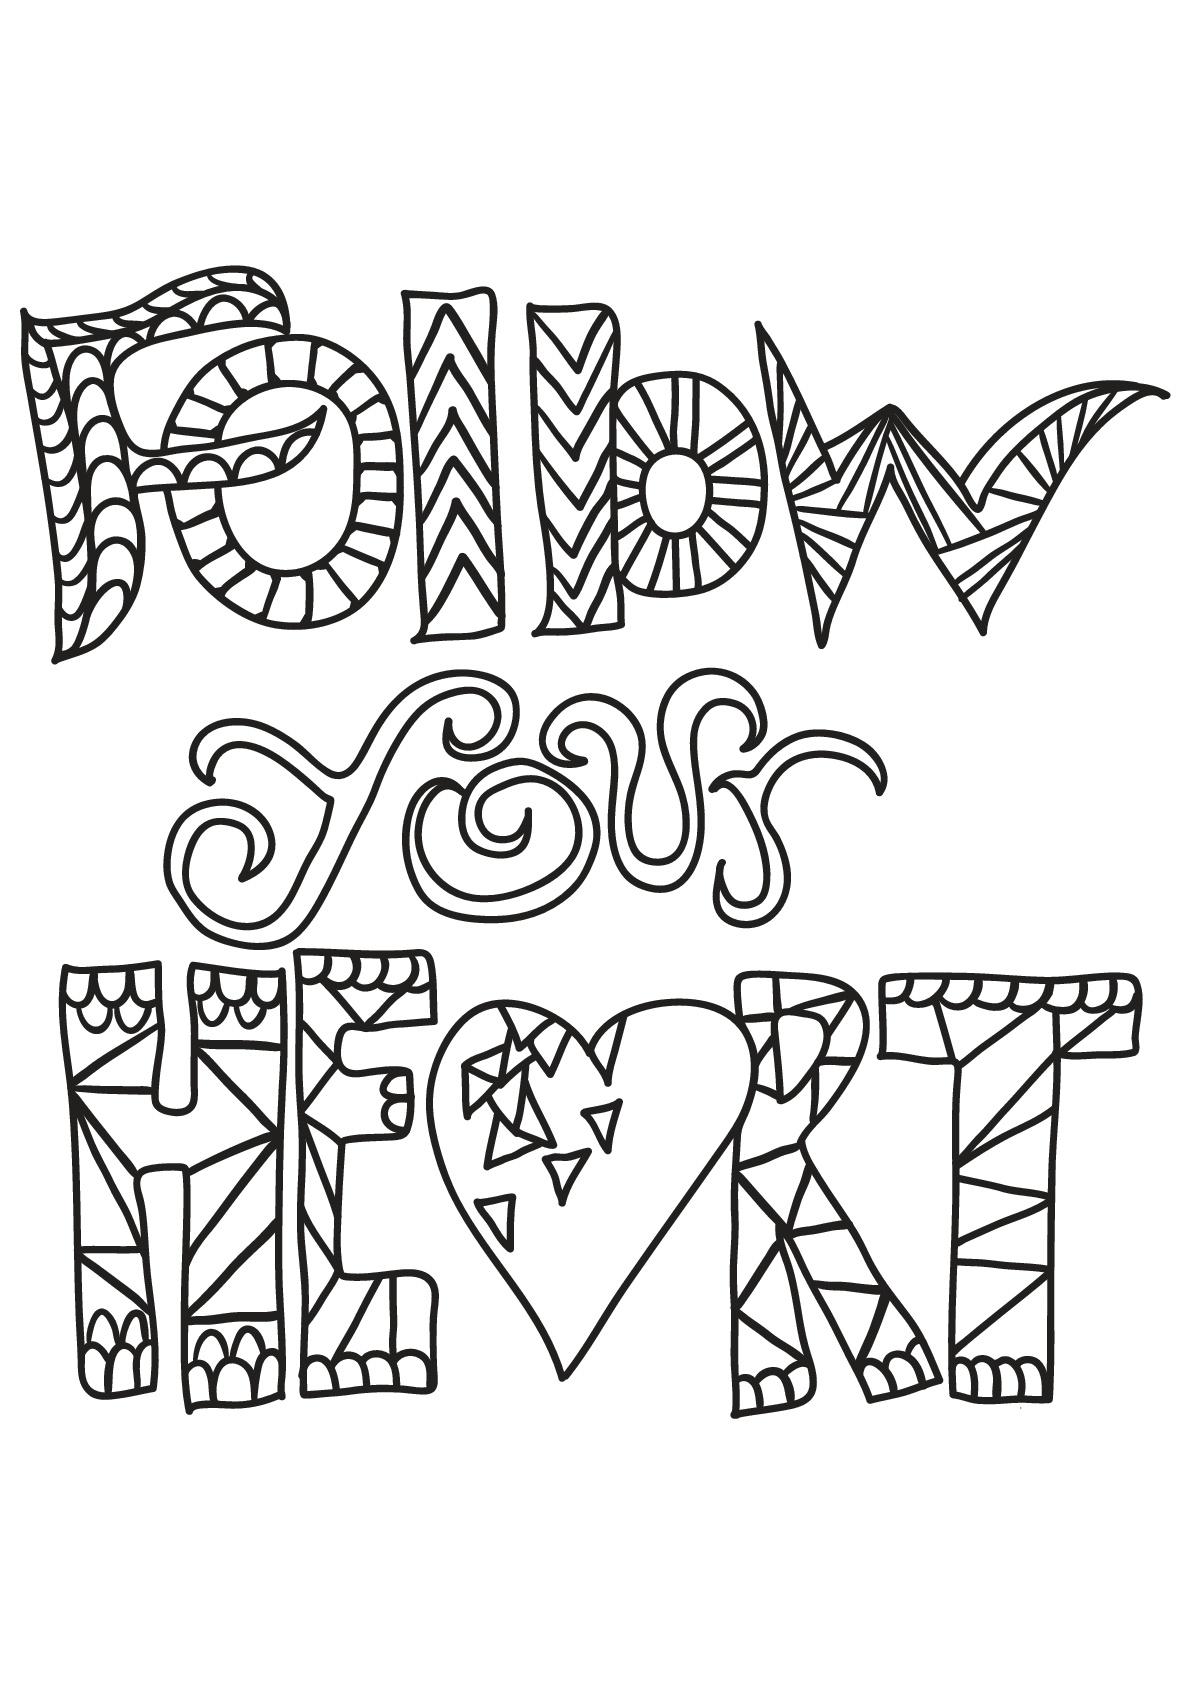 Download 10 Of the Best Ideas for Printable Adult Coloring Pages ...